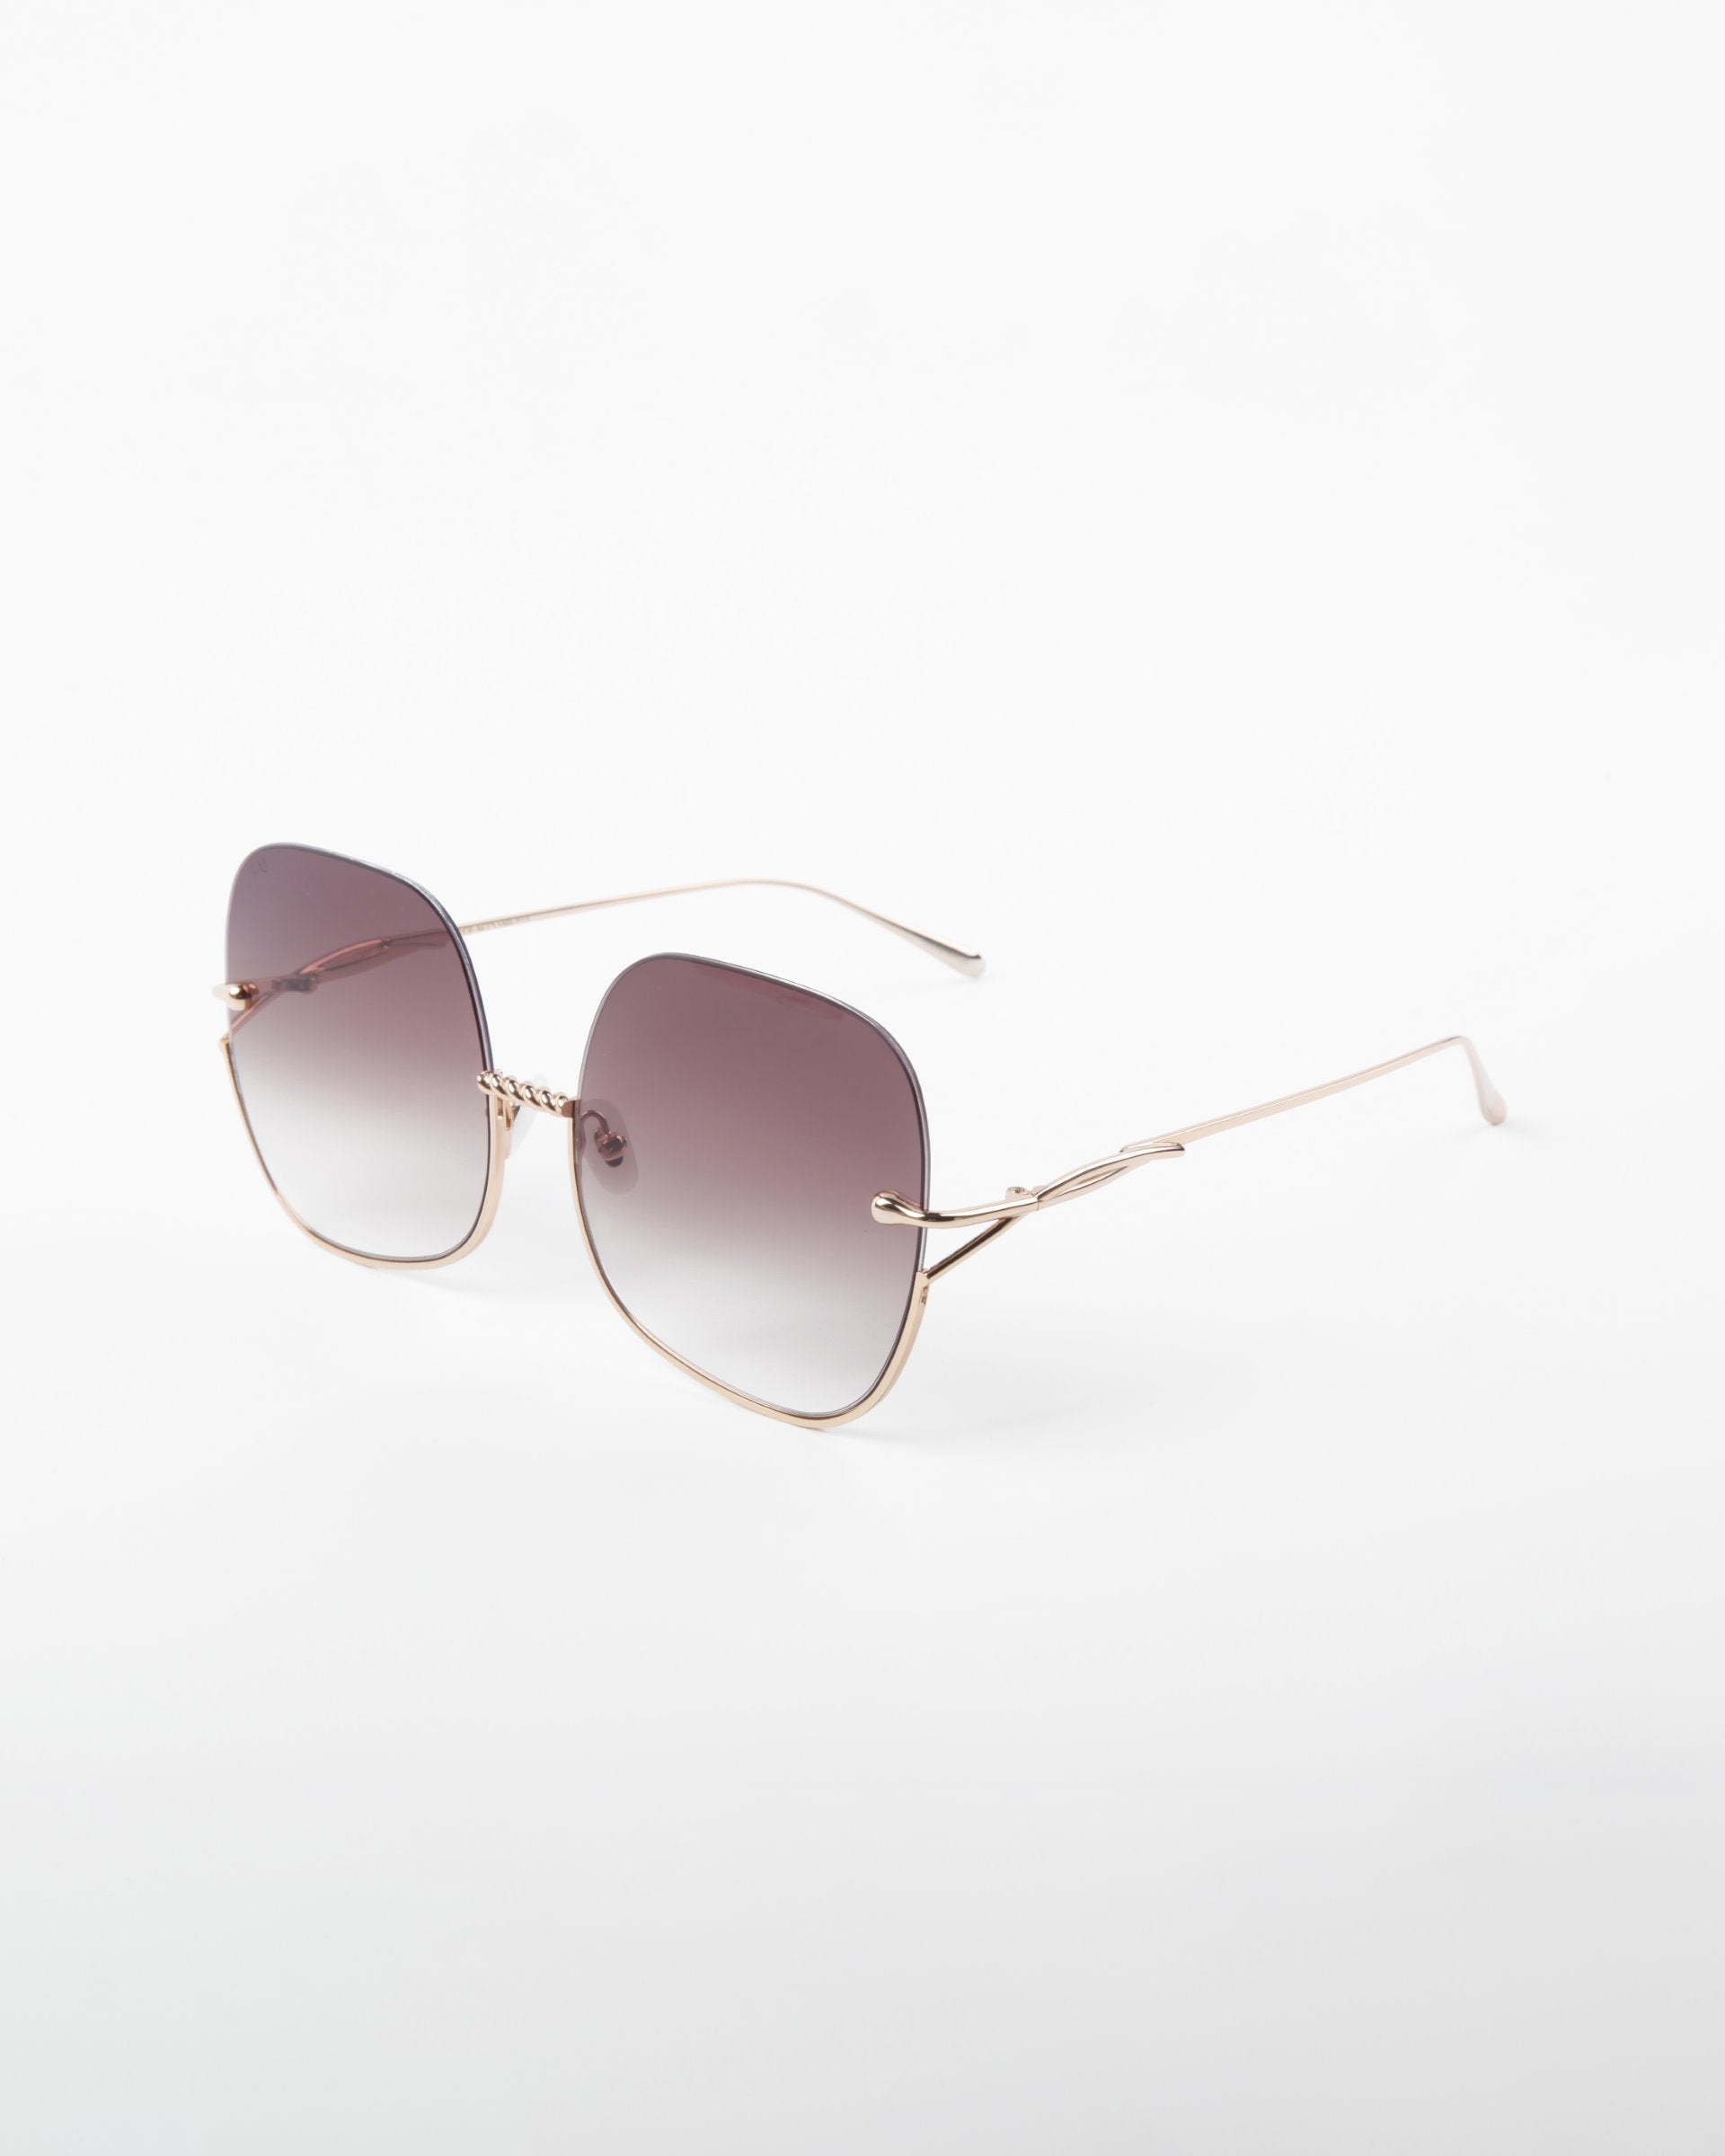 A pair of square-shaped Duchess sunglasses by For Art&#39;s Sake® boasting a handmade gold-plated frame and shatter-resistant, gradient lenses. The lenses transition from dark at the top to lighter shades toward the bottom, offering full UVA &amp; UVB protection. The Duchess sunglasses by For Art&#39;s Sake® are positioned on a plain white background.